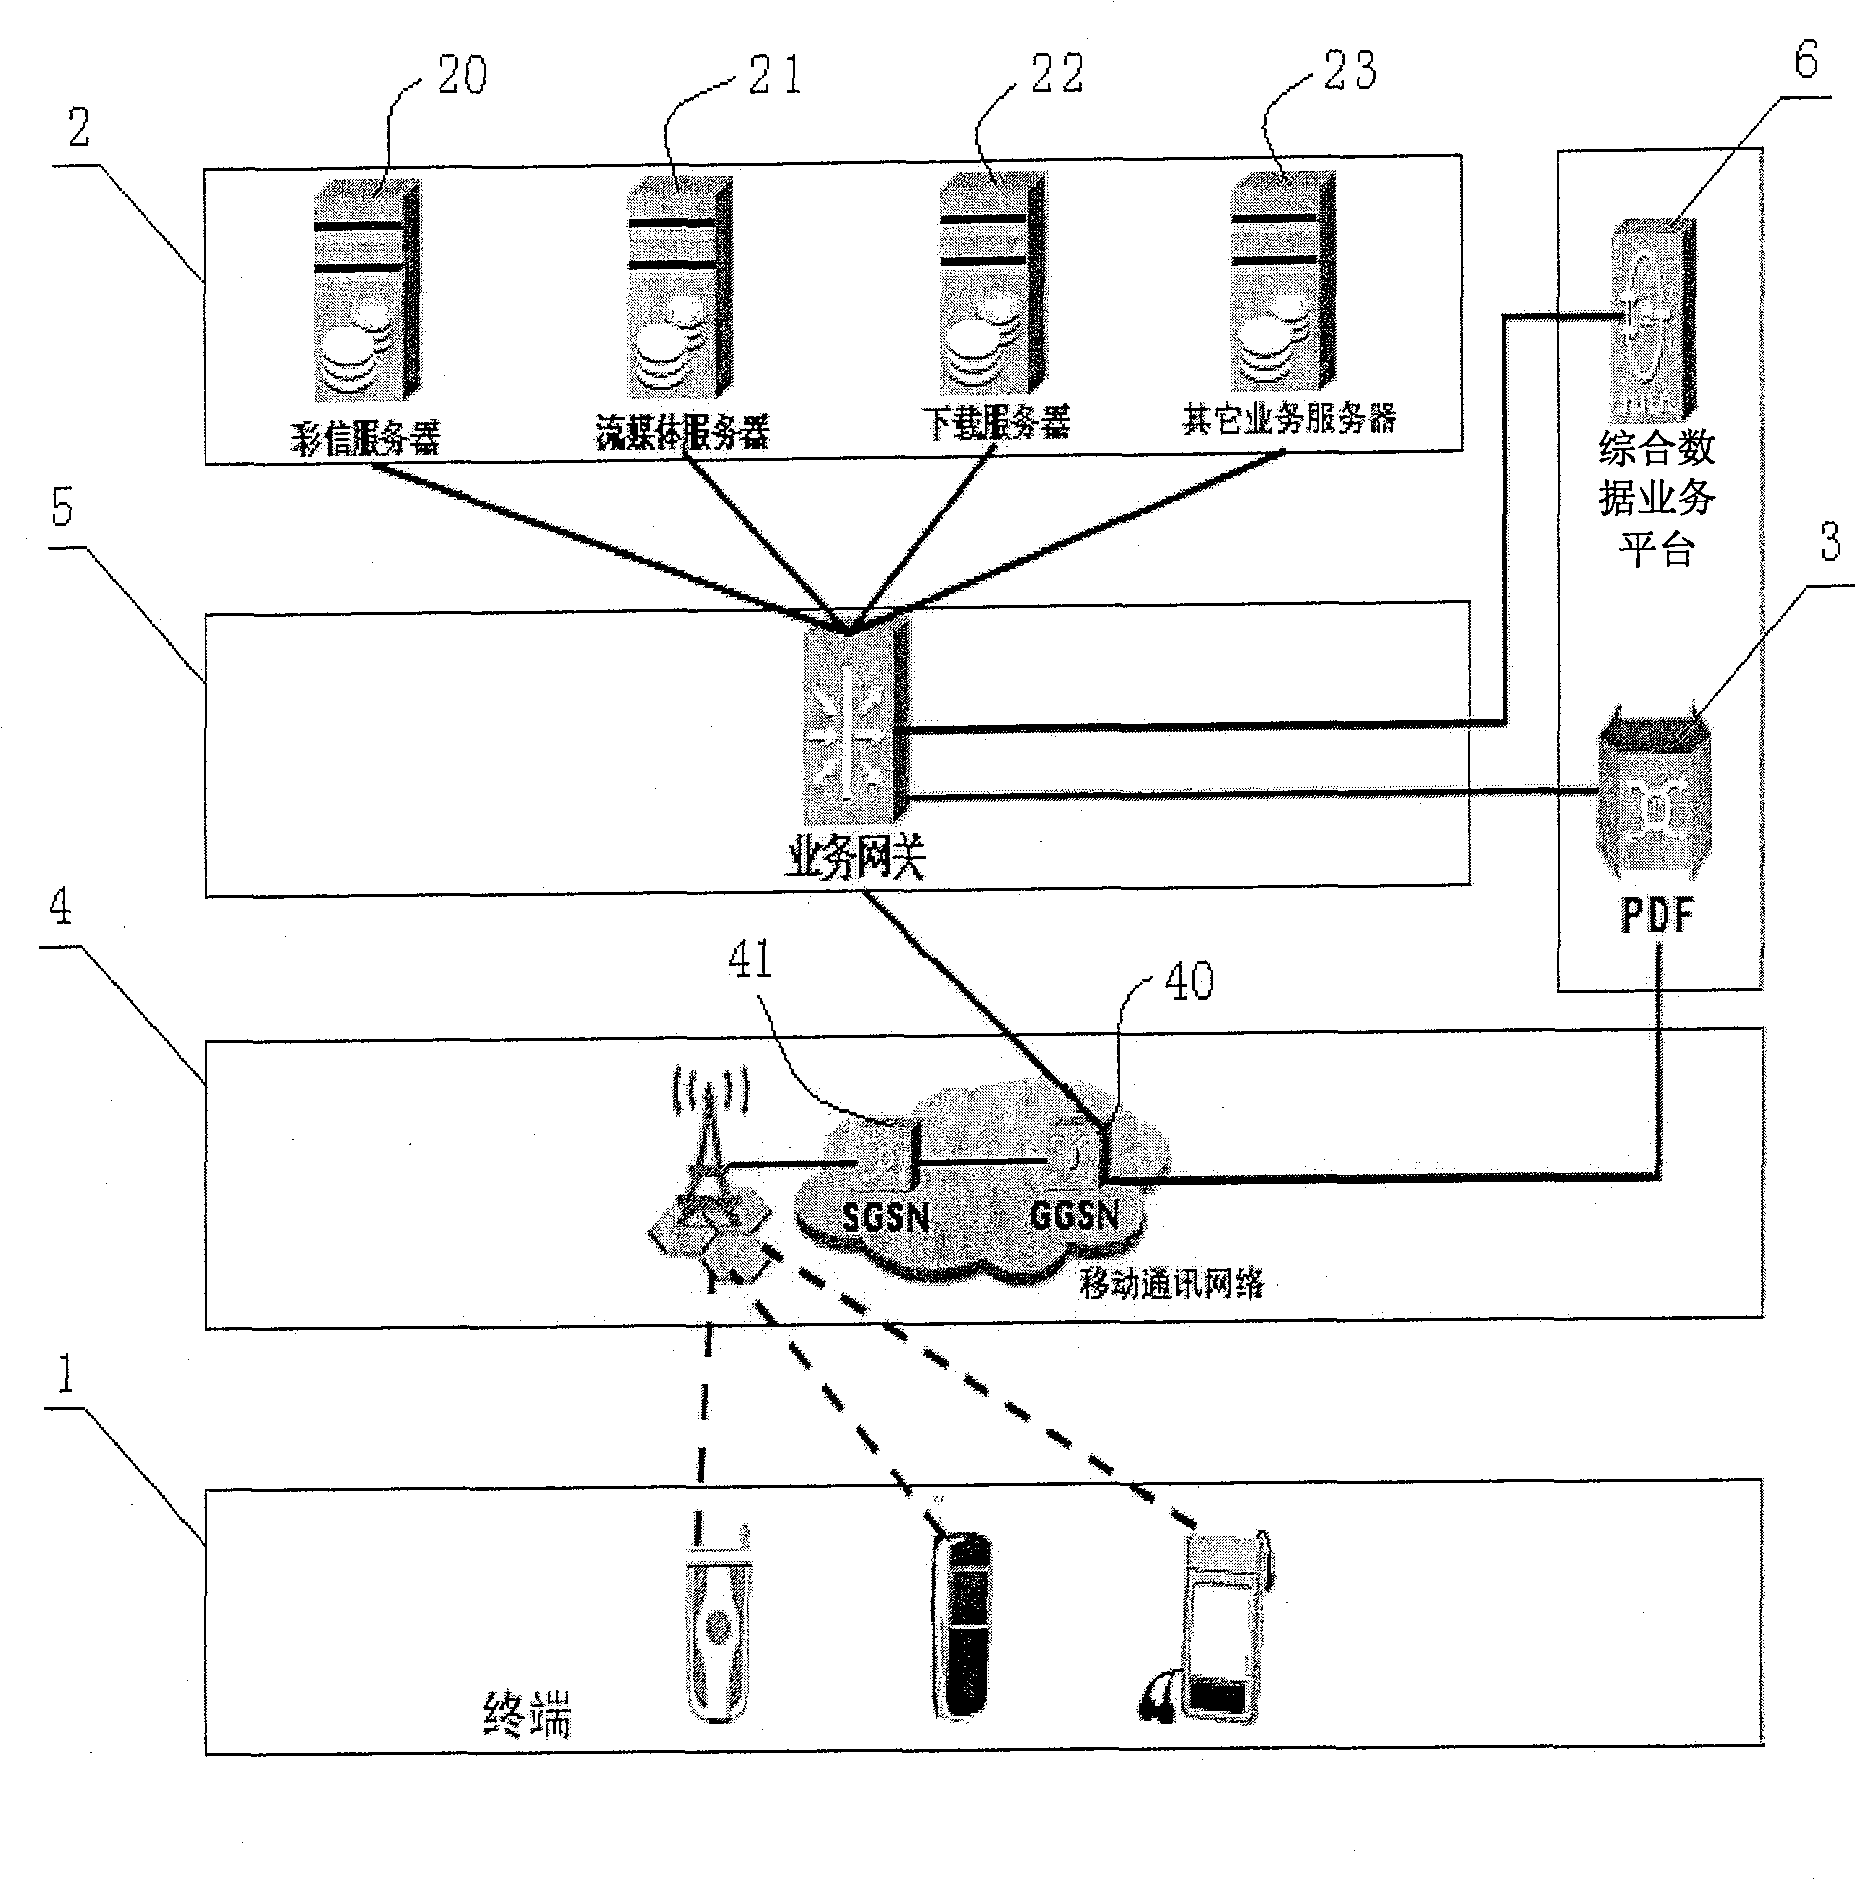 Service gateway service system, service quality consultation and service resource releasing method